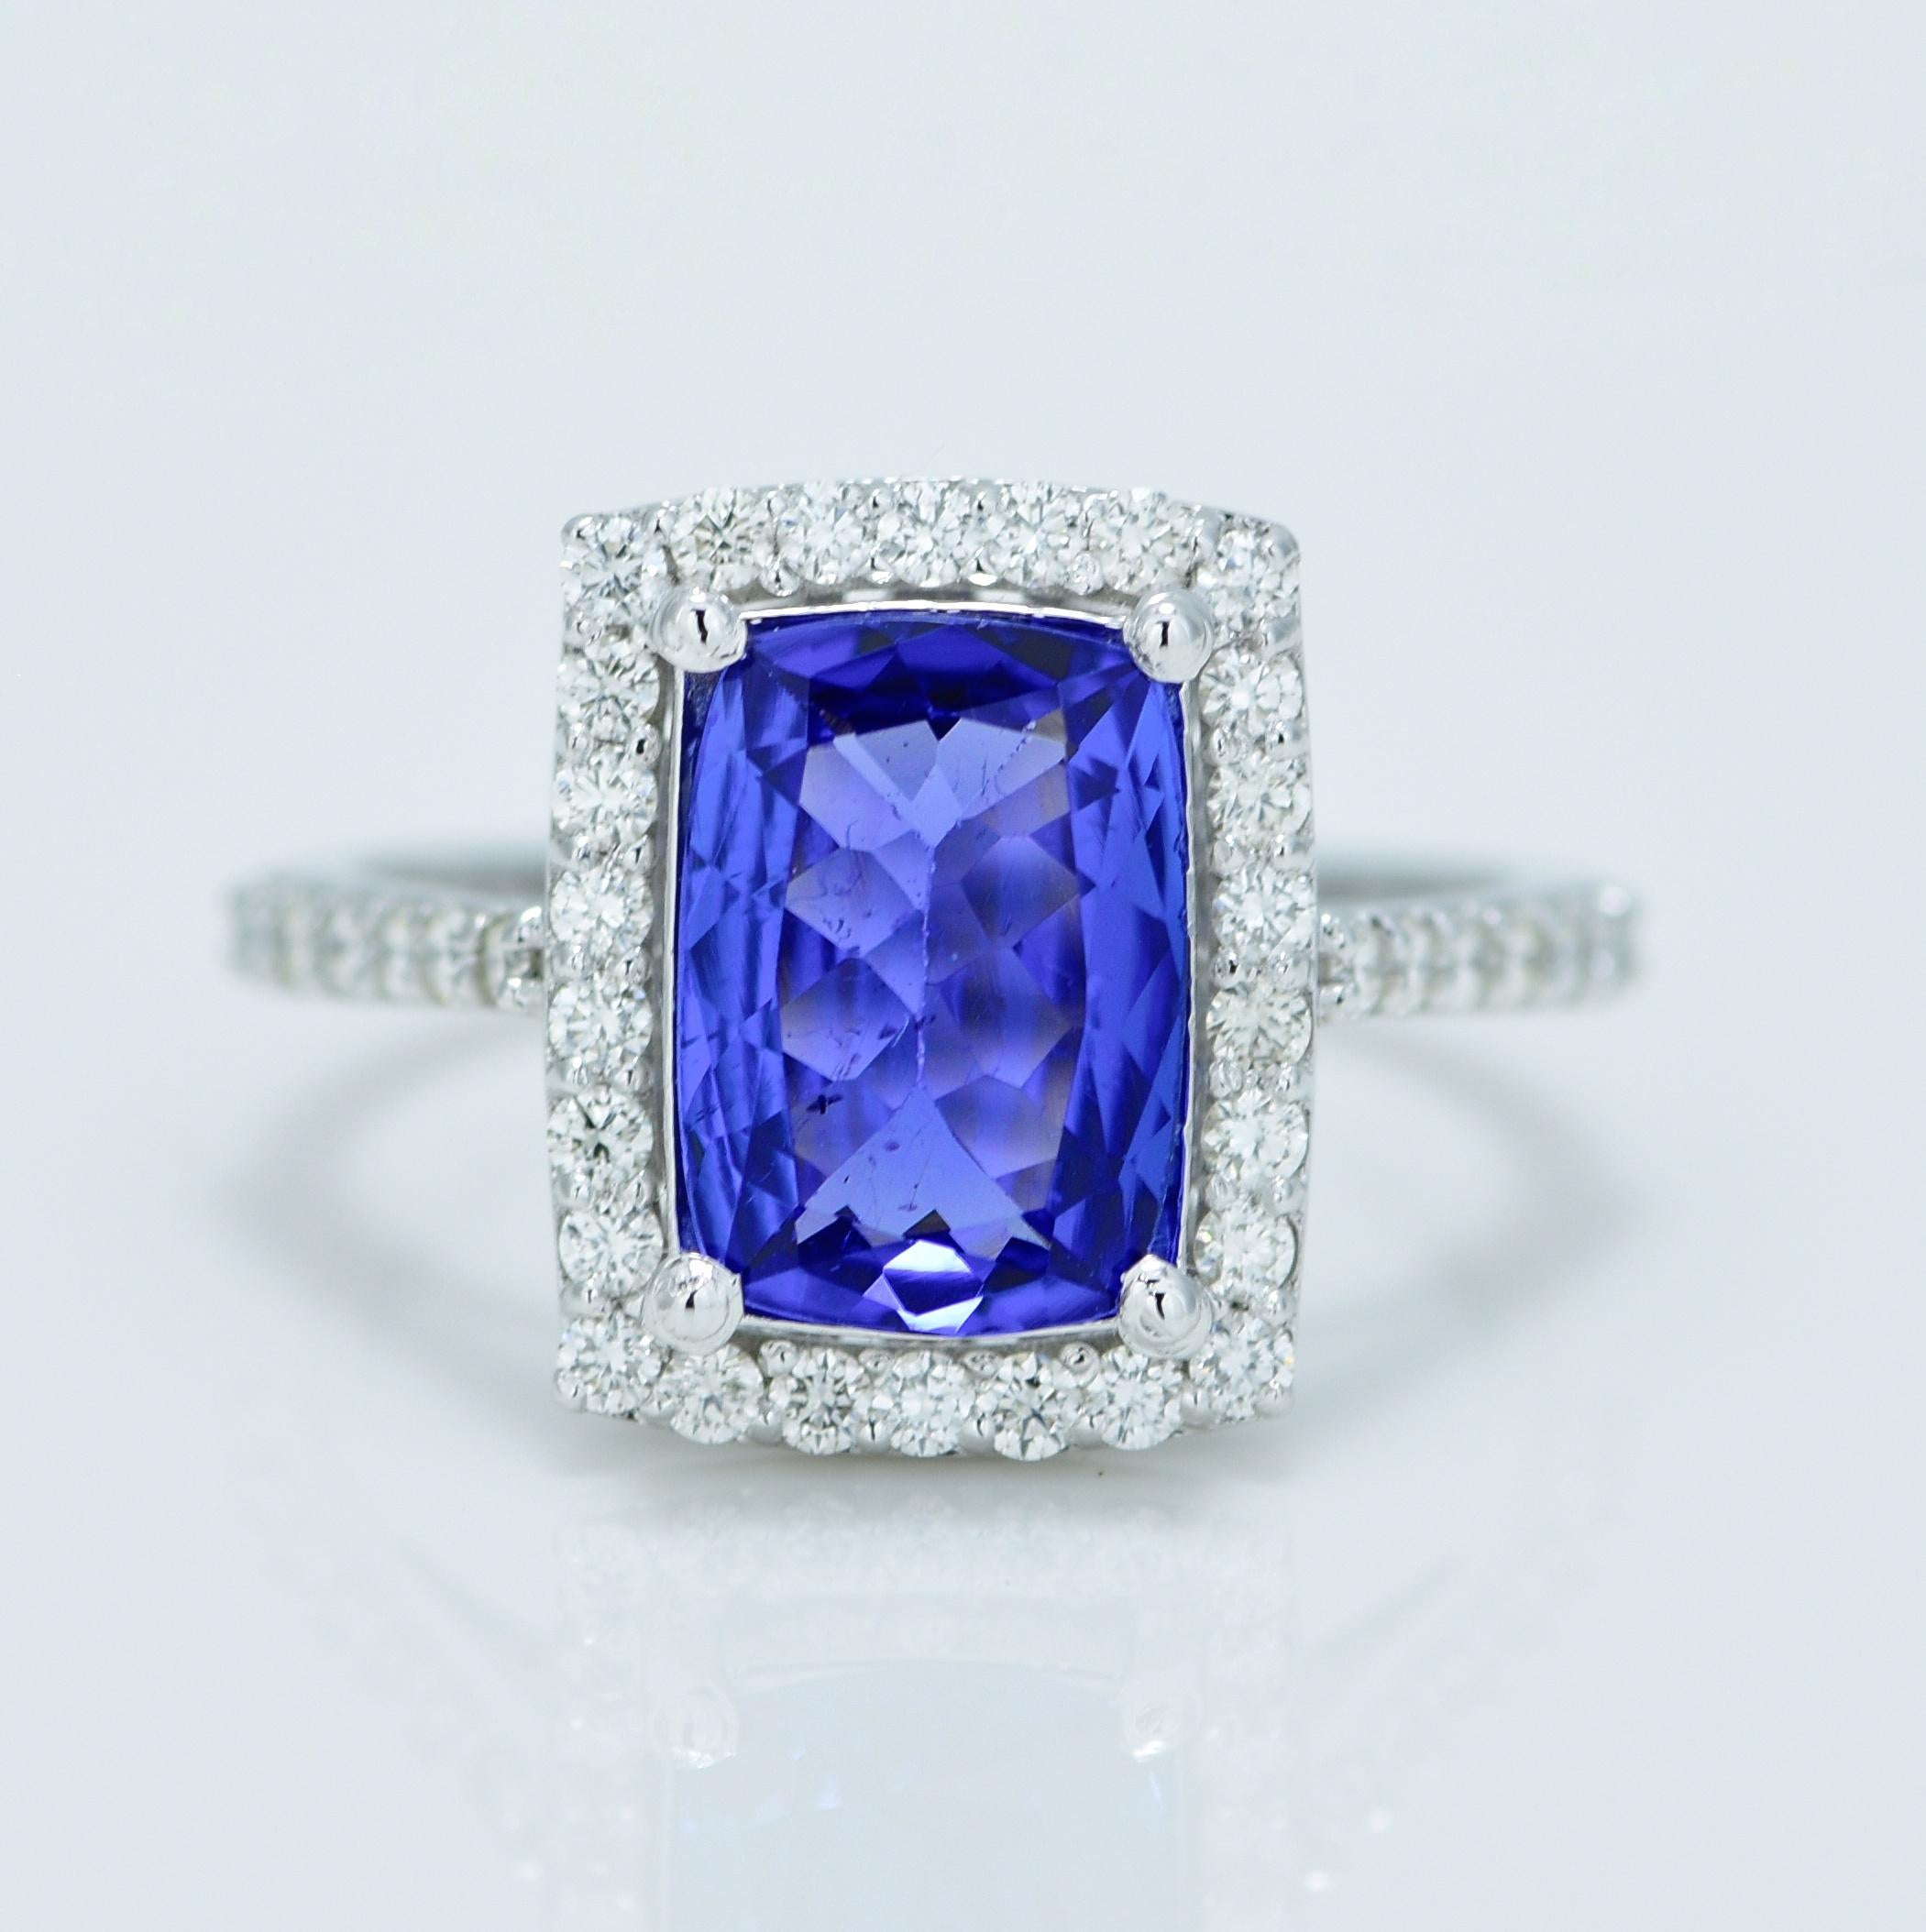 Stunning Violetish Blue Tanzanite and Diamond halo ring.

Centre Stone - Natural Tanzanite, 
Centre Stone Weight - 2.32 Carat, 
Centre Stone Shape & Cut - Long Cushion Step Cut
 
Total Number of Diamonds - 40, 
Diamonds Carat Weight - 0.57